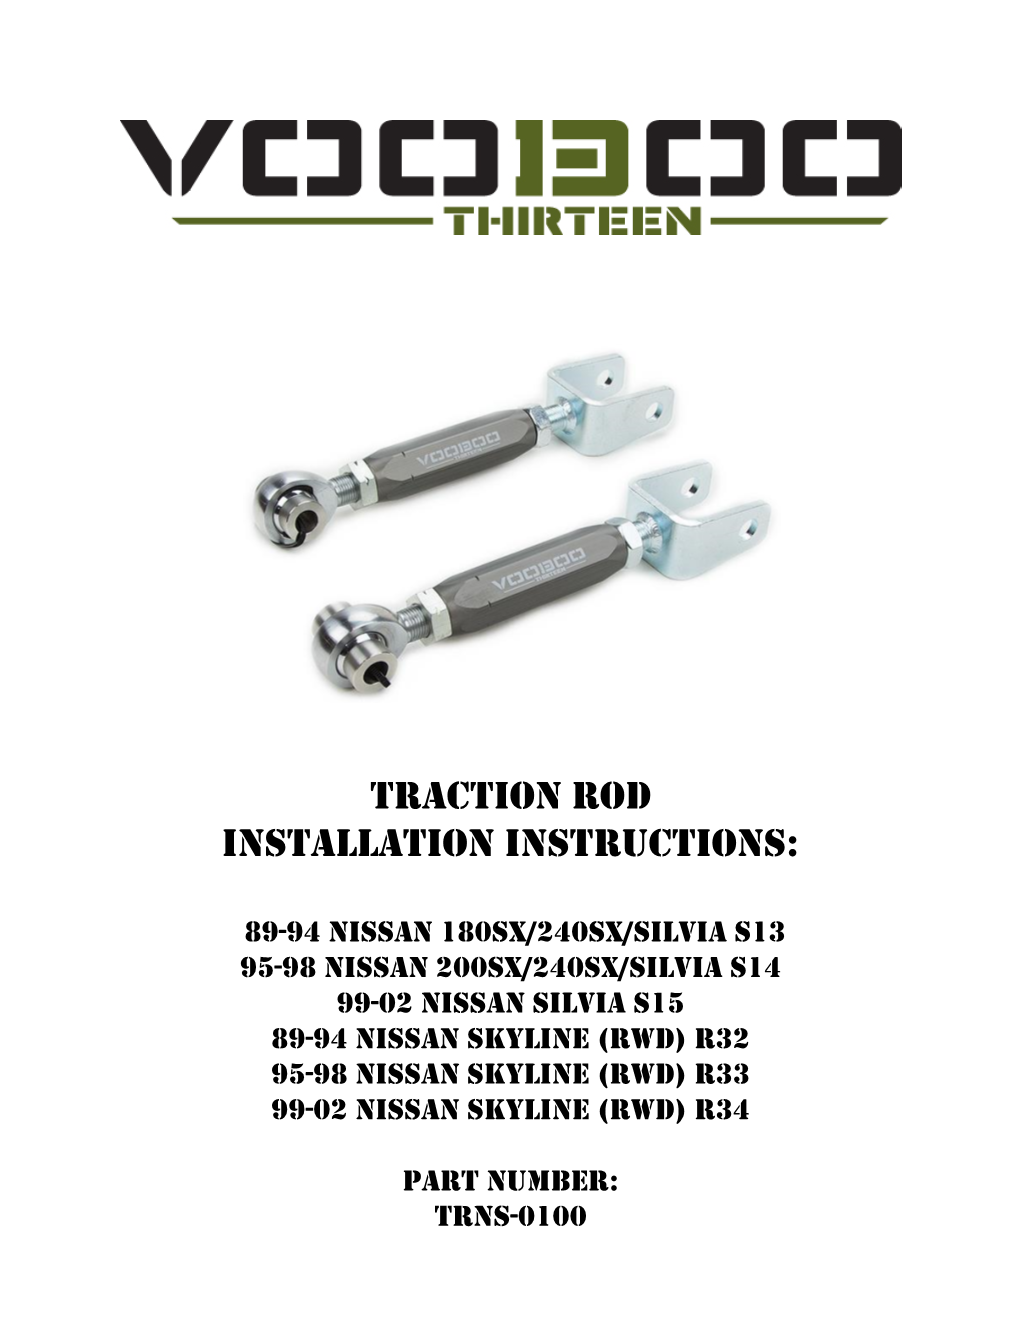 Traction ROD INSTALLATION INSTRUCTIONS